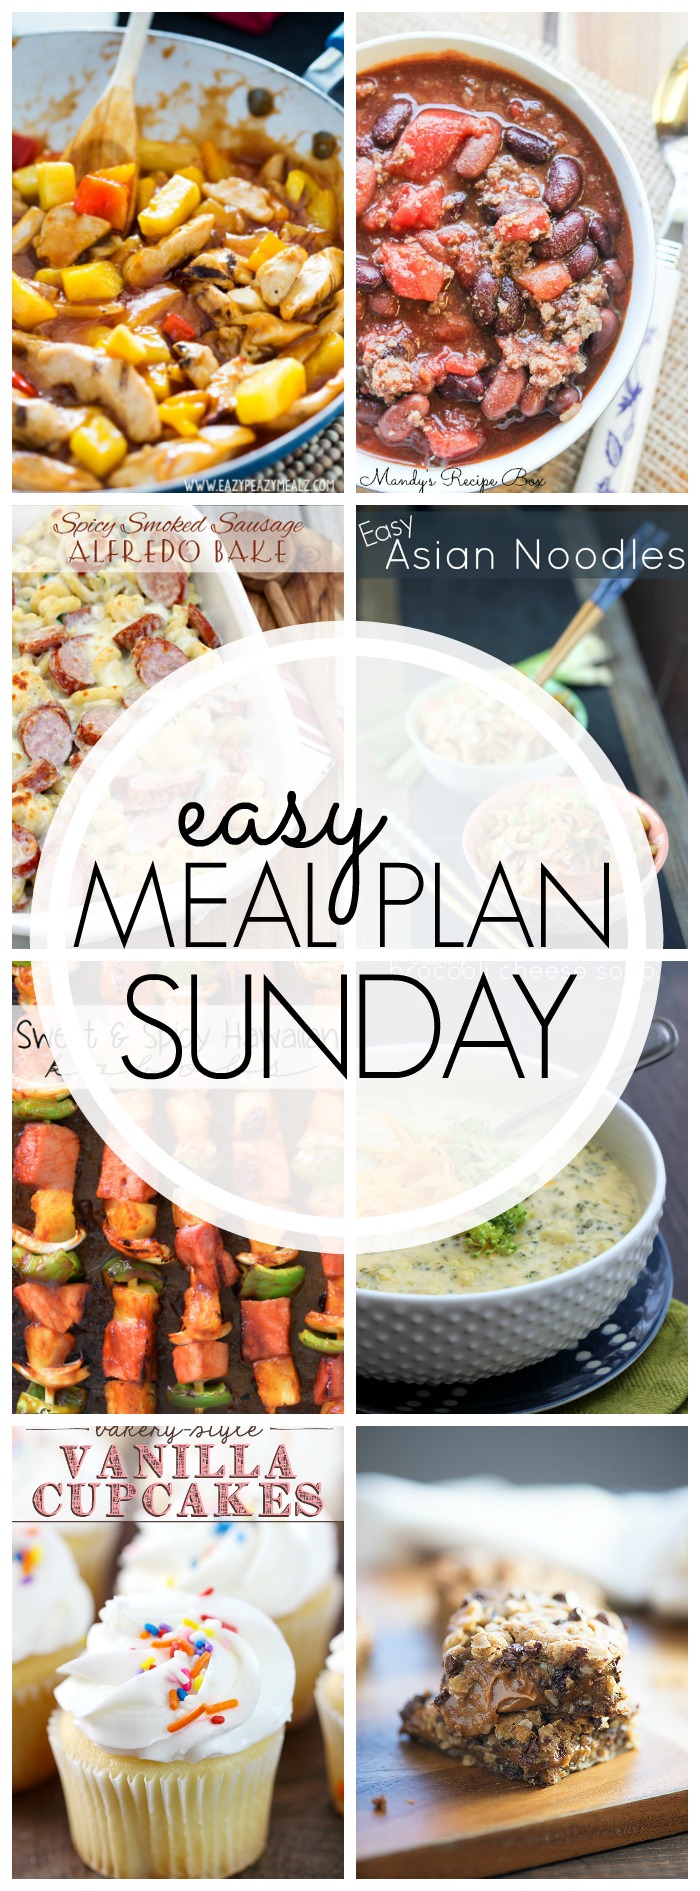 Easy Meal Plan Sunday #45